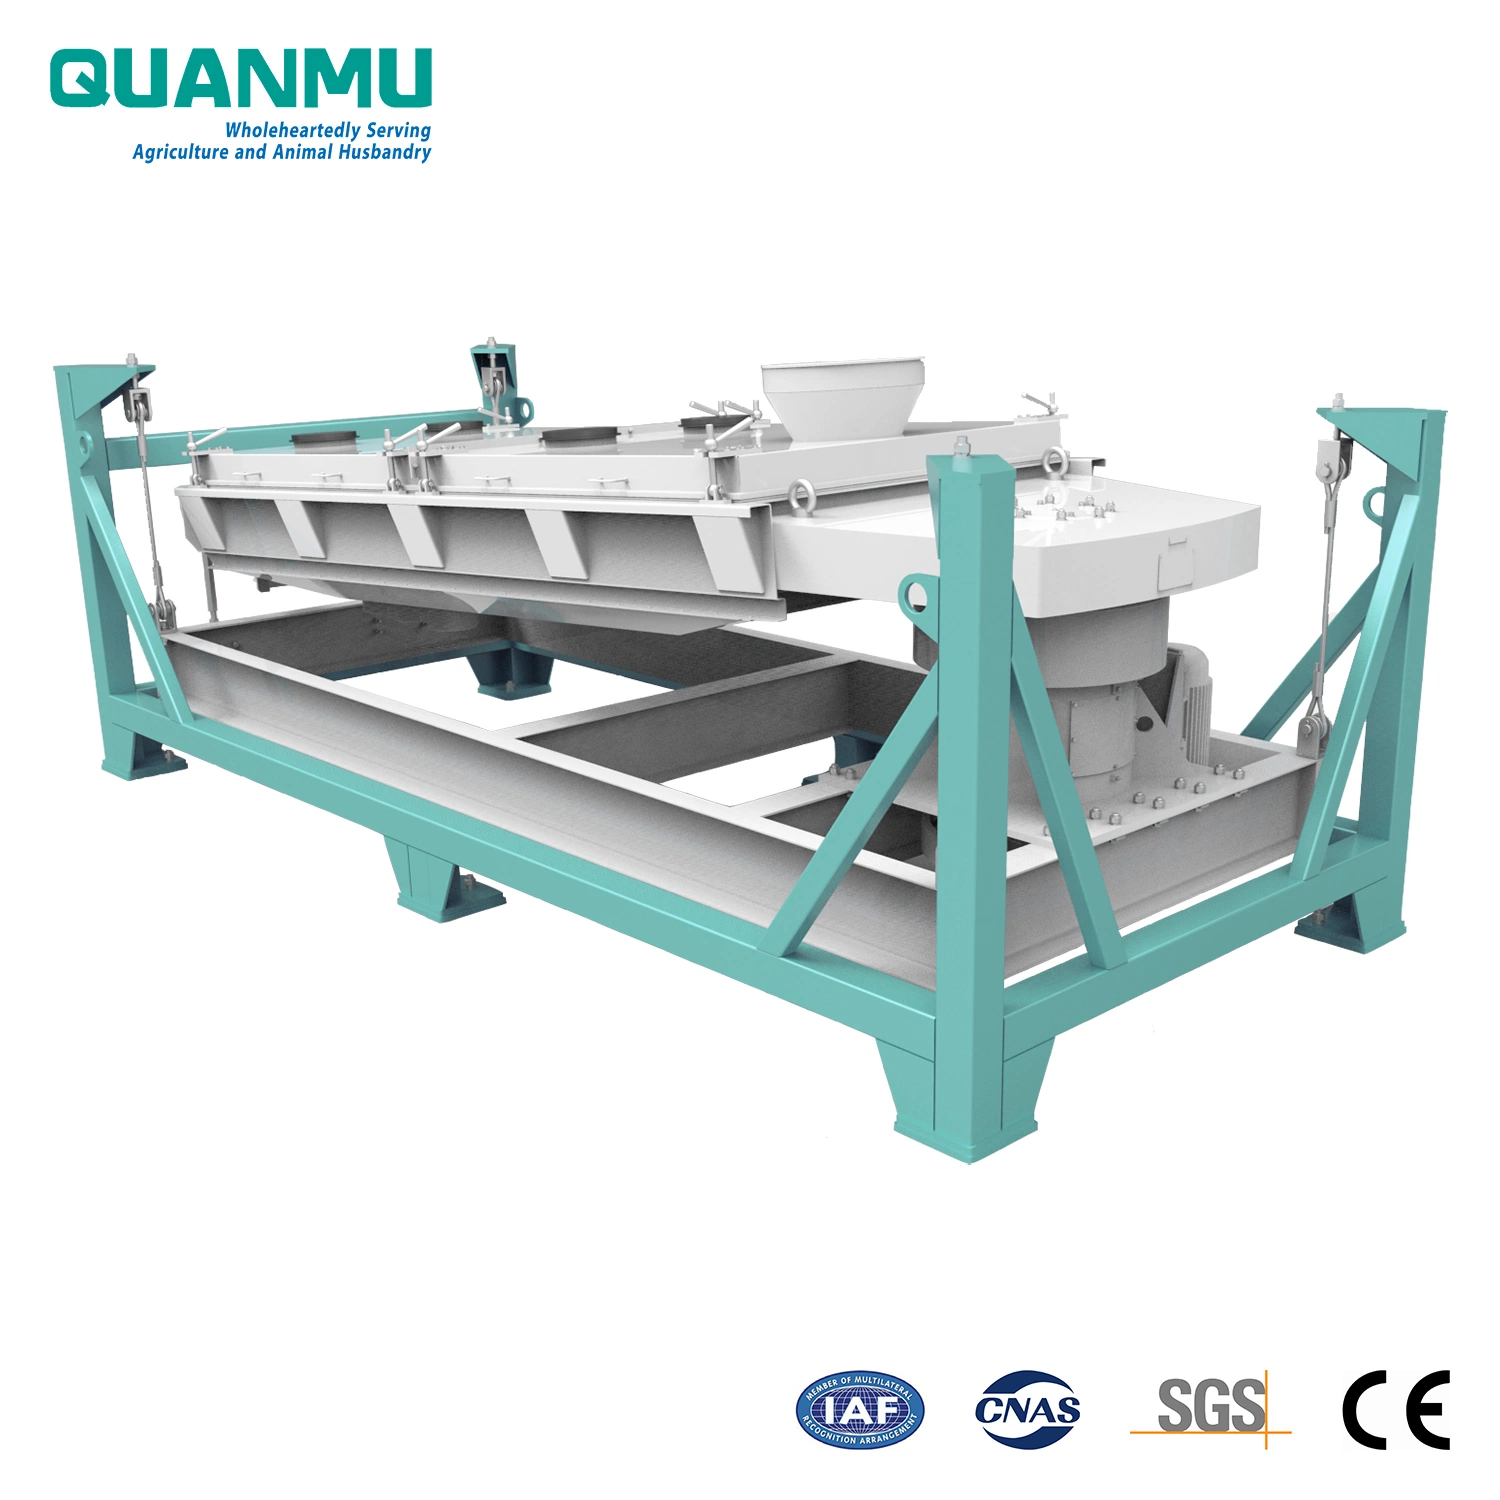 Grain Raw Material and Animal Feed Pellet Rotary Vibrating Grading Sifting Machine in Vibration Grader Sifter Machine